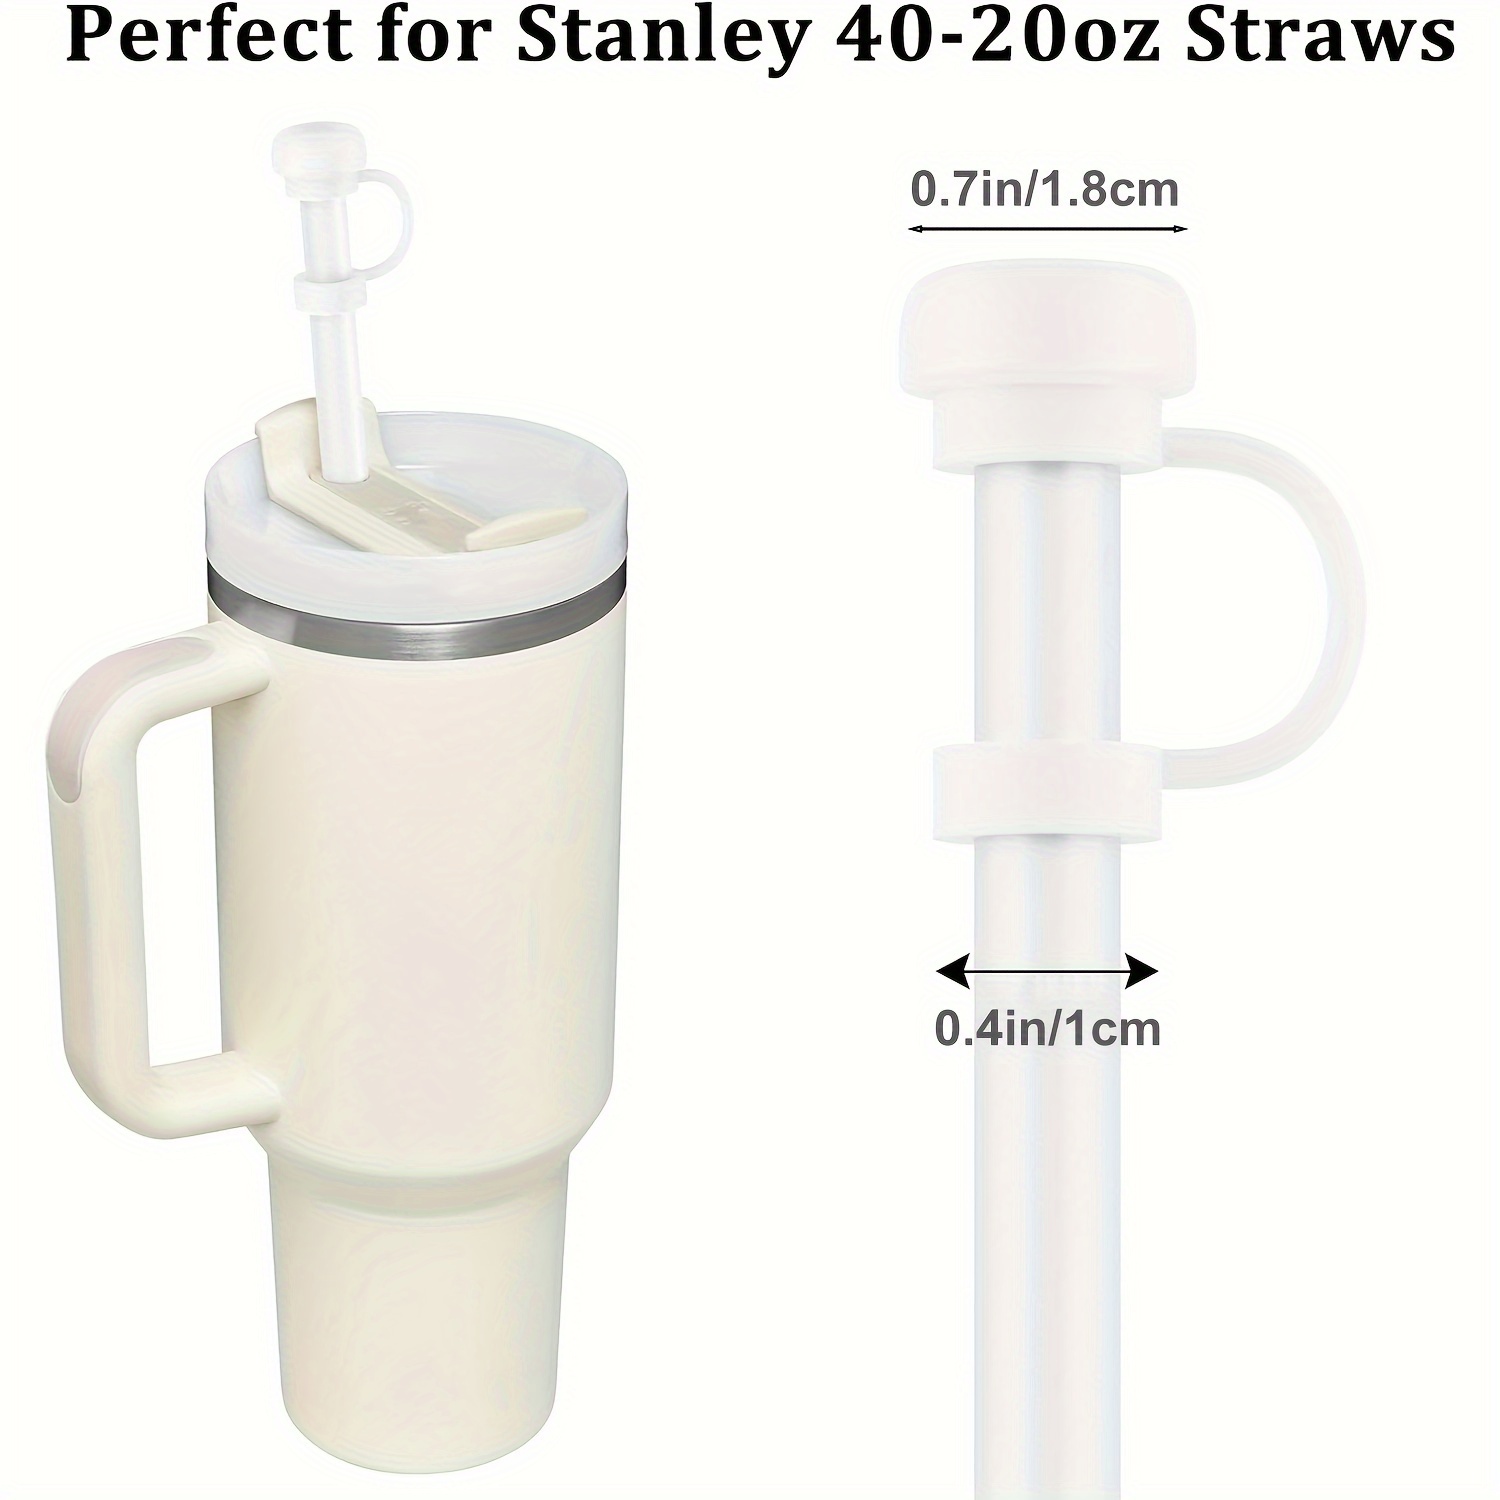 Straw Cover For Stanley Cup, Silicone Straw Covers For Stanley Cup